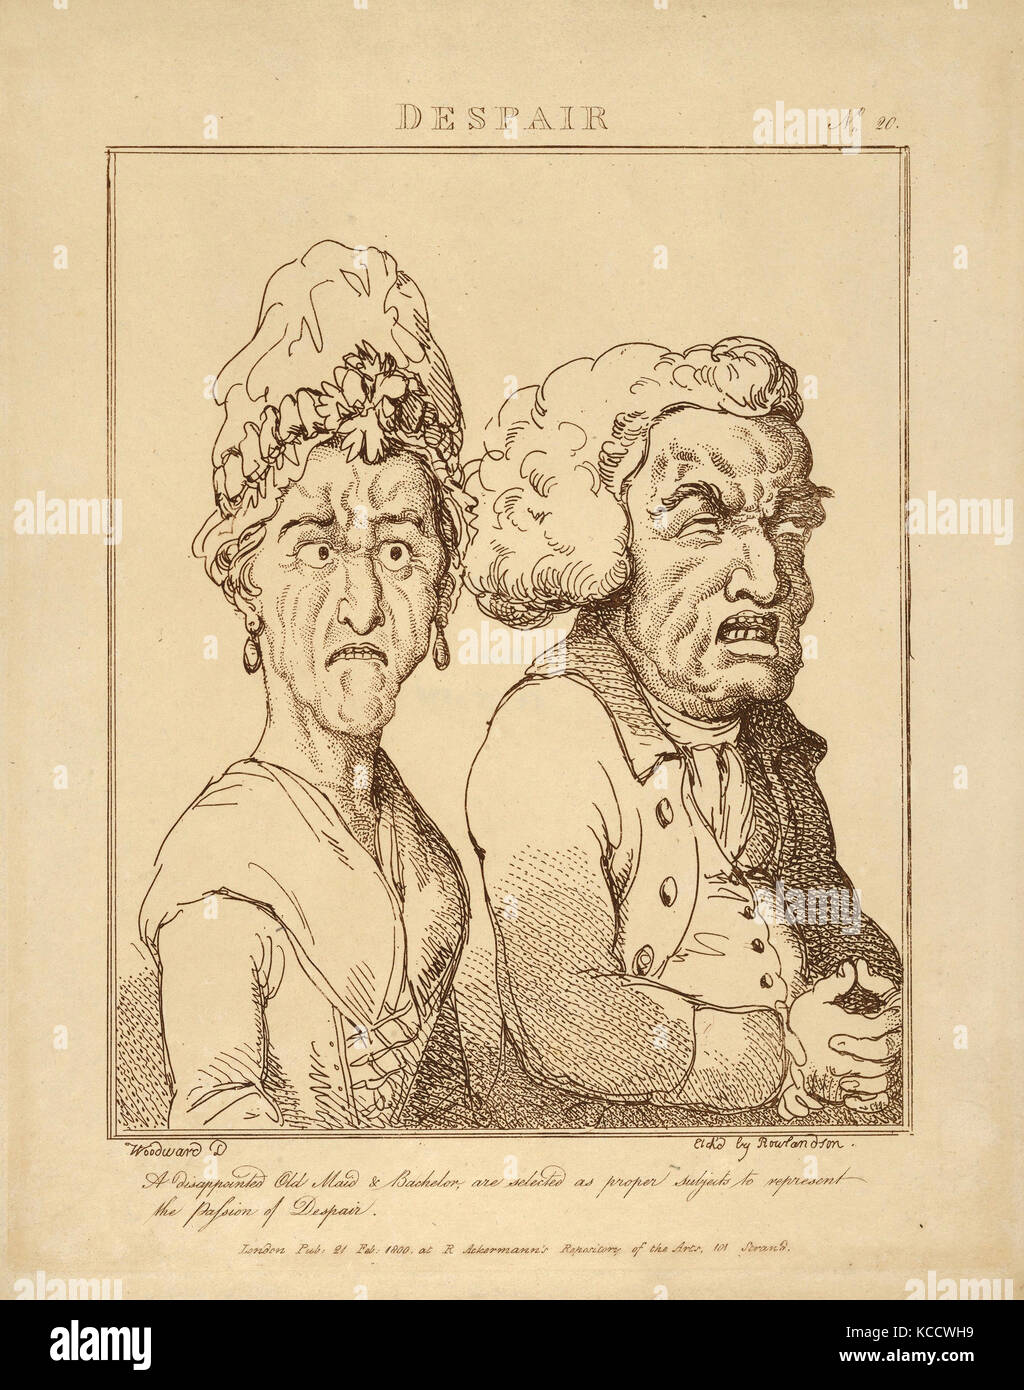 Drawings and Prints, Print, Despair, Le Brun Travested, or Caricatures of the Passions, Artist, After, Rudolph Ackermann Stock Photo